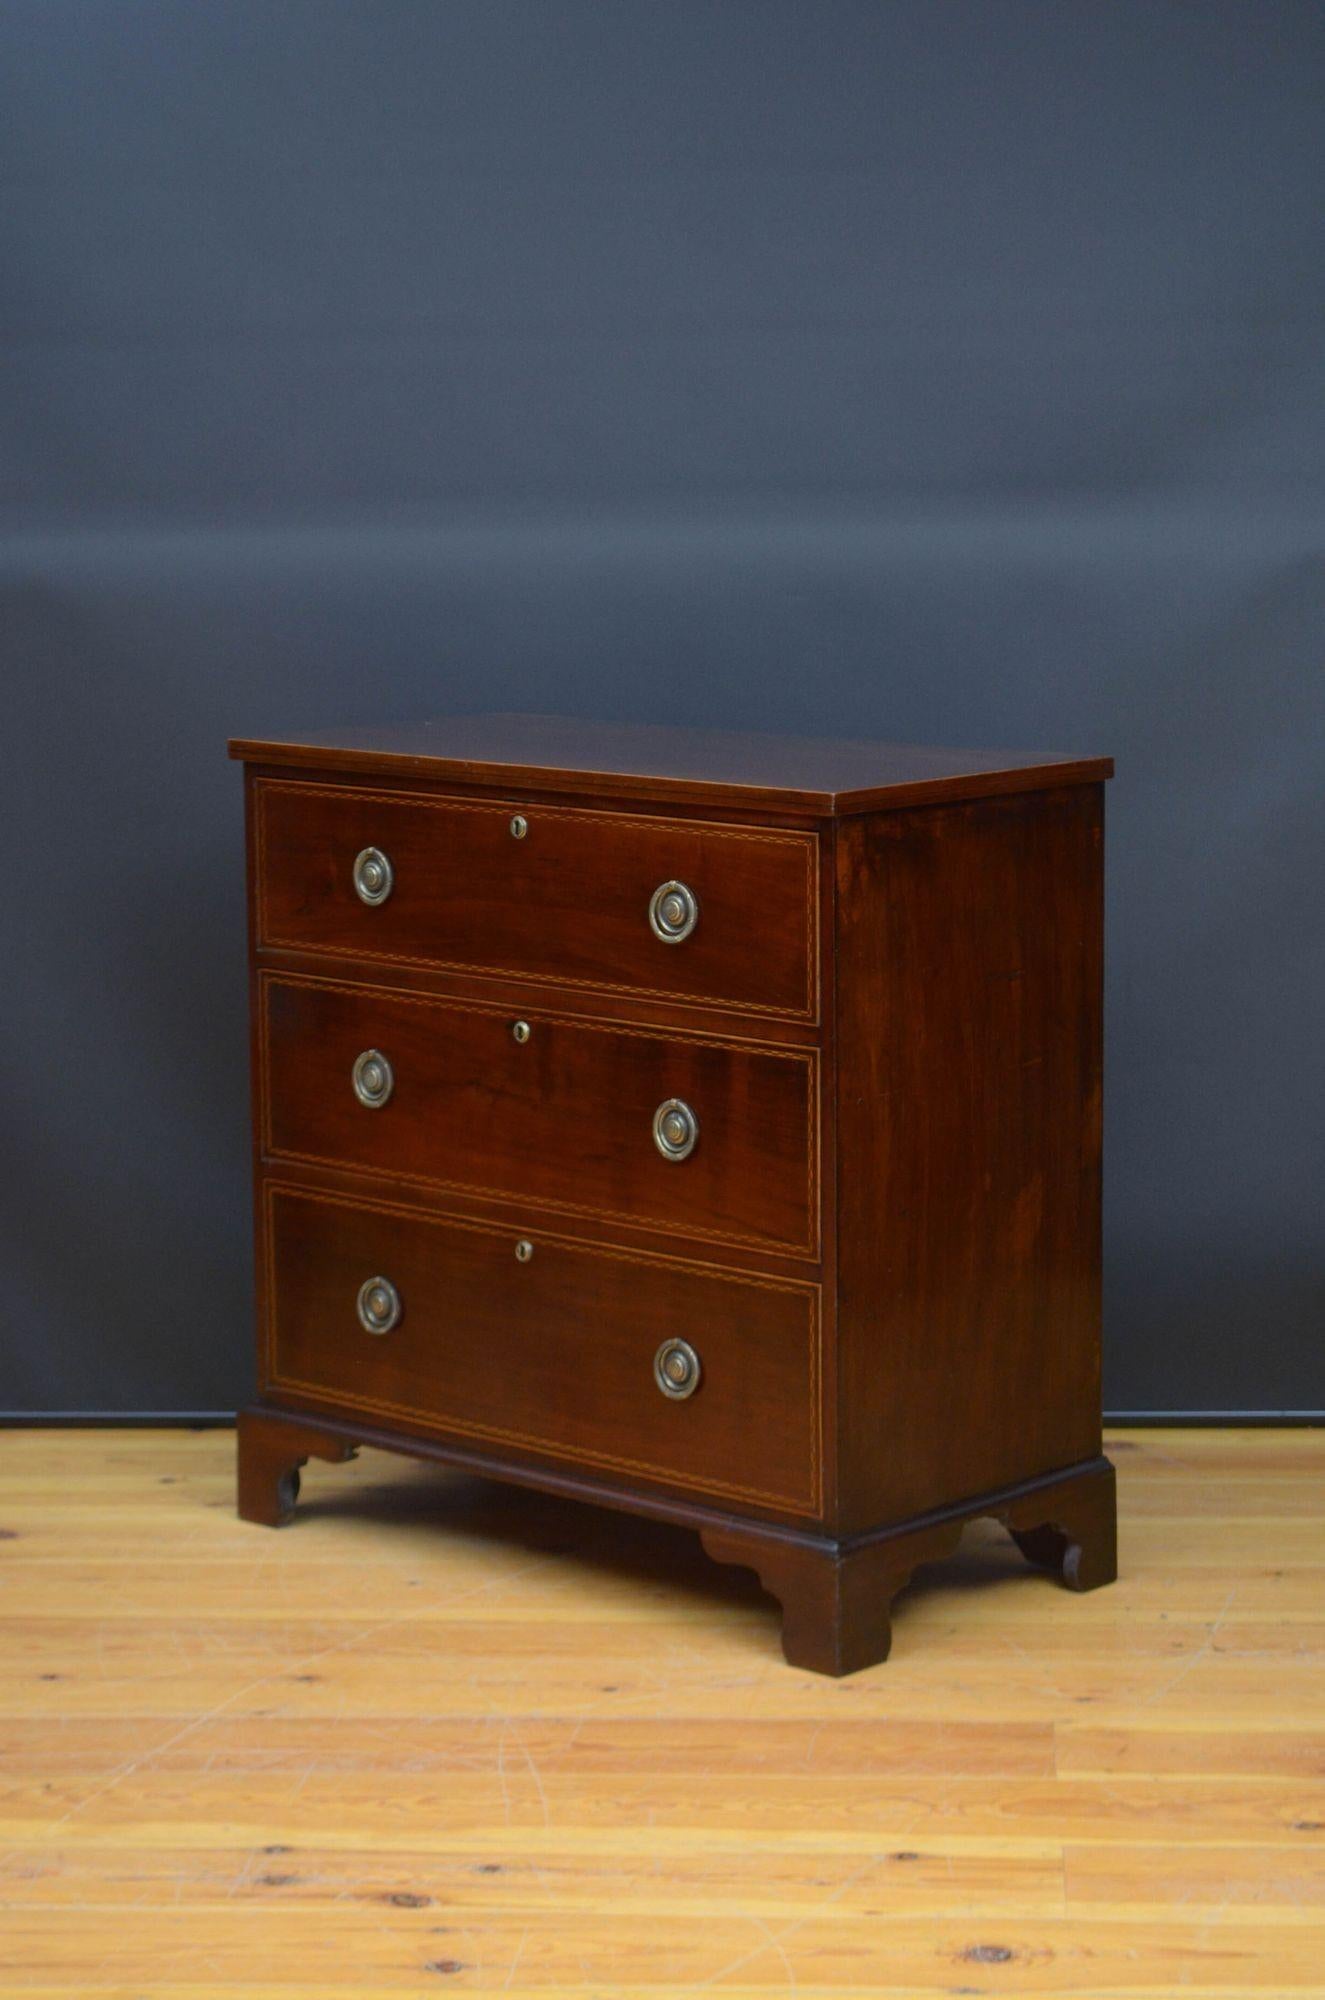 J035 Georgian mahogany and inlaid chest of drawers, having oversailing figured mahogany top with inlaid edge above three inlaid, graduated drawers fitted with brass ring handles, all standing on shaped bracket feet. This antique chest of drawers is